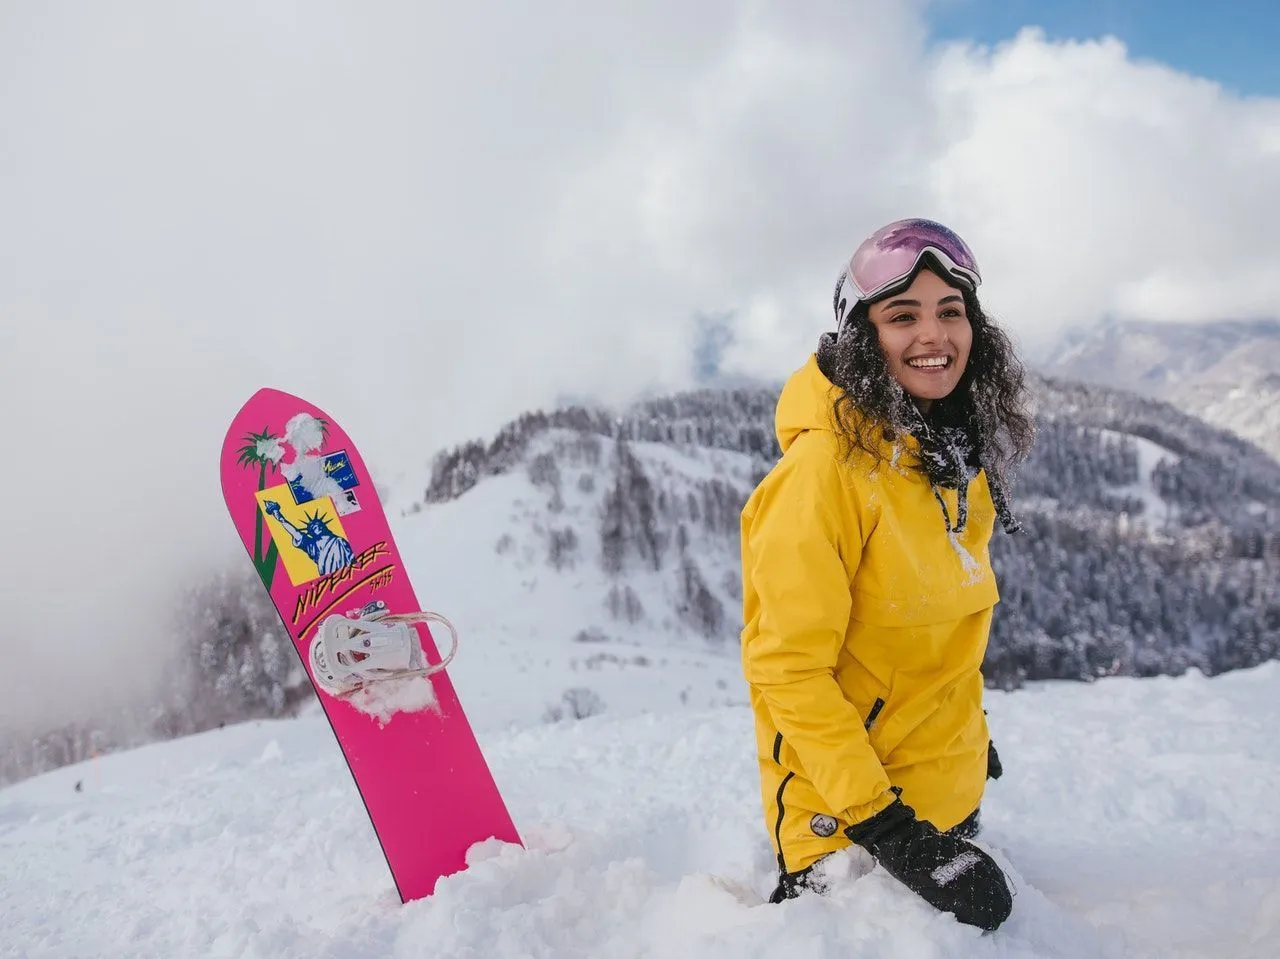 The best female snowboarders are talented in all styles of snowboarding.